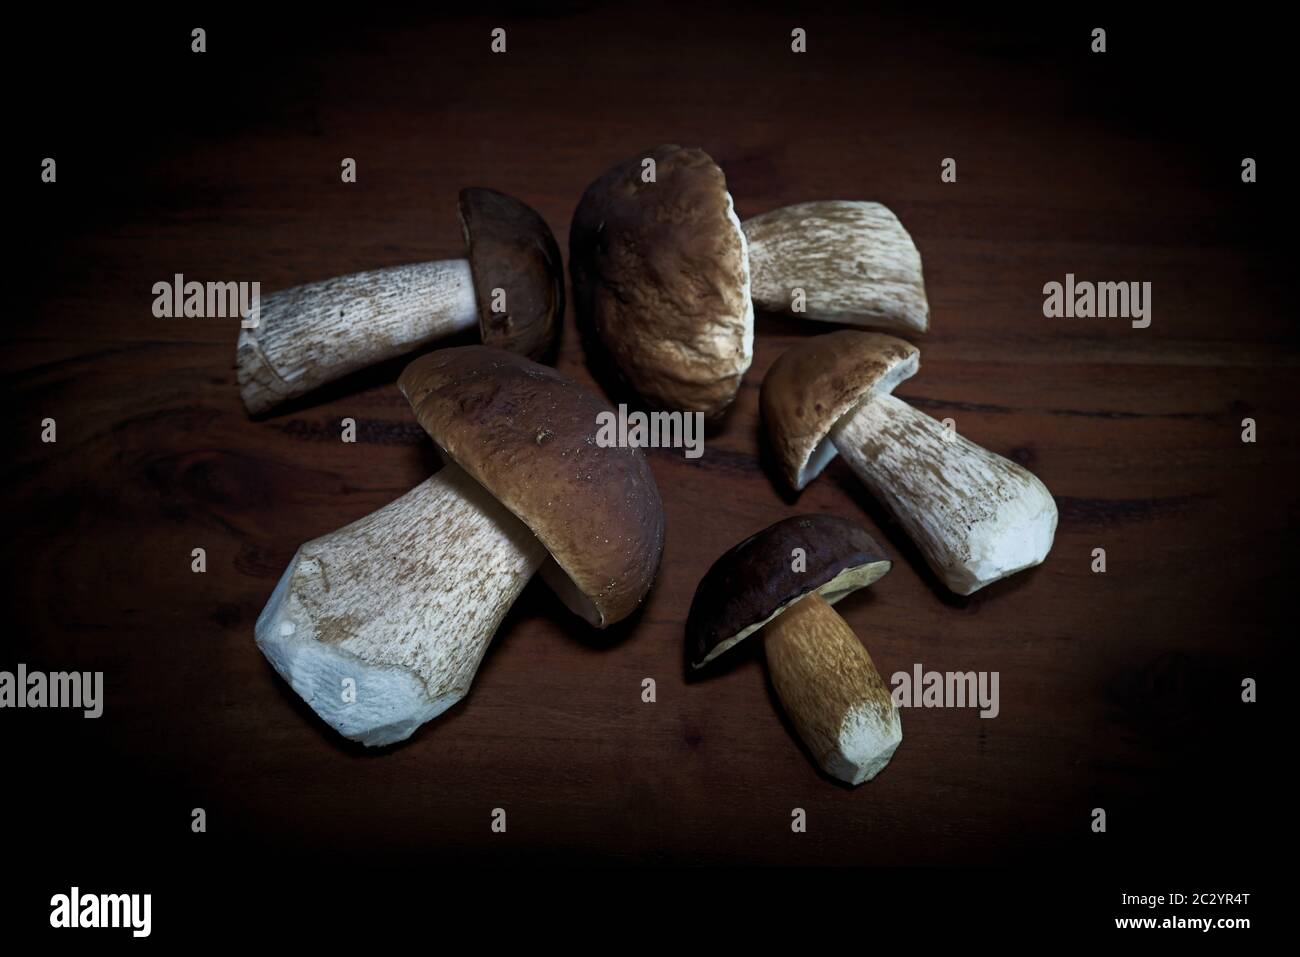 Edible mushrooms from the forest lie on a kitchen table Stock Photo